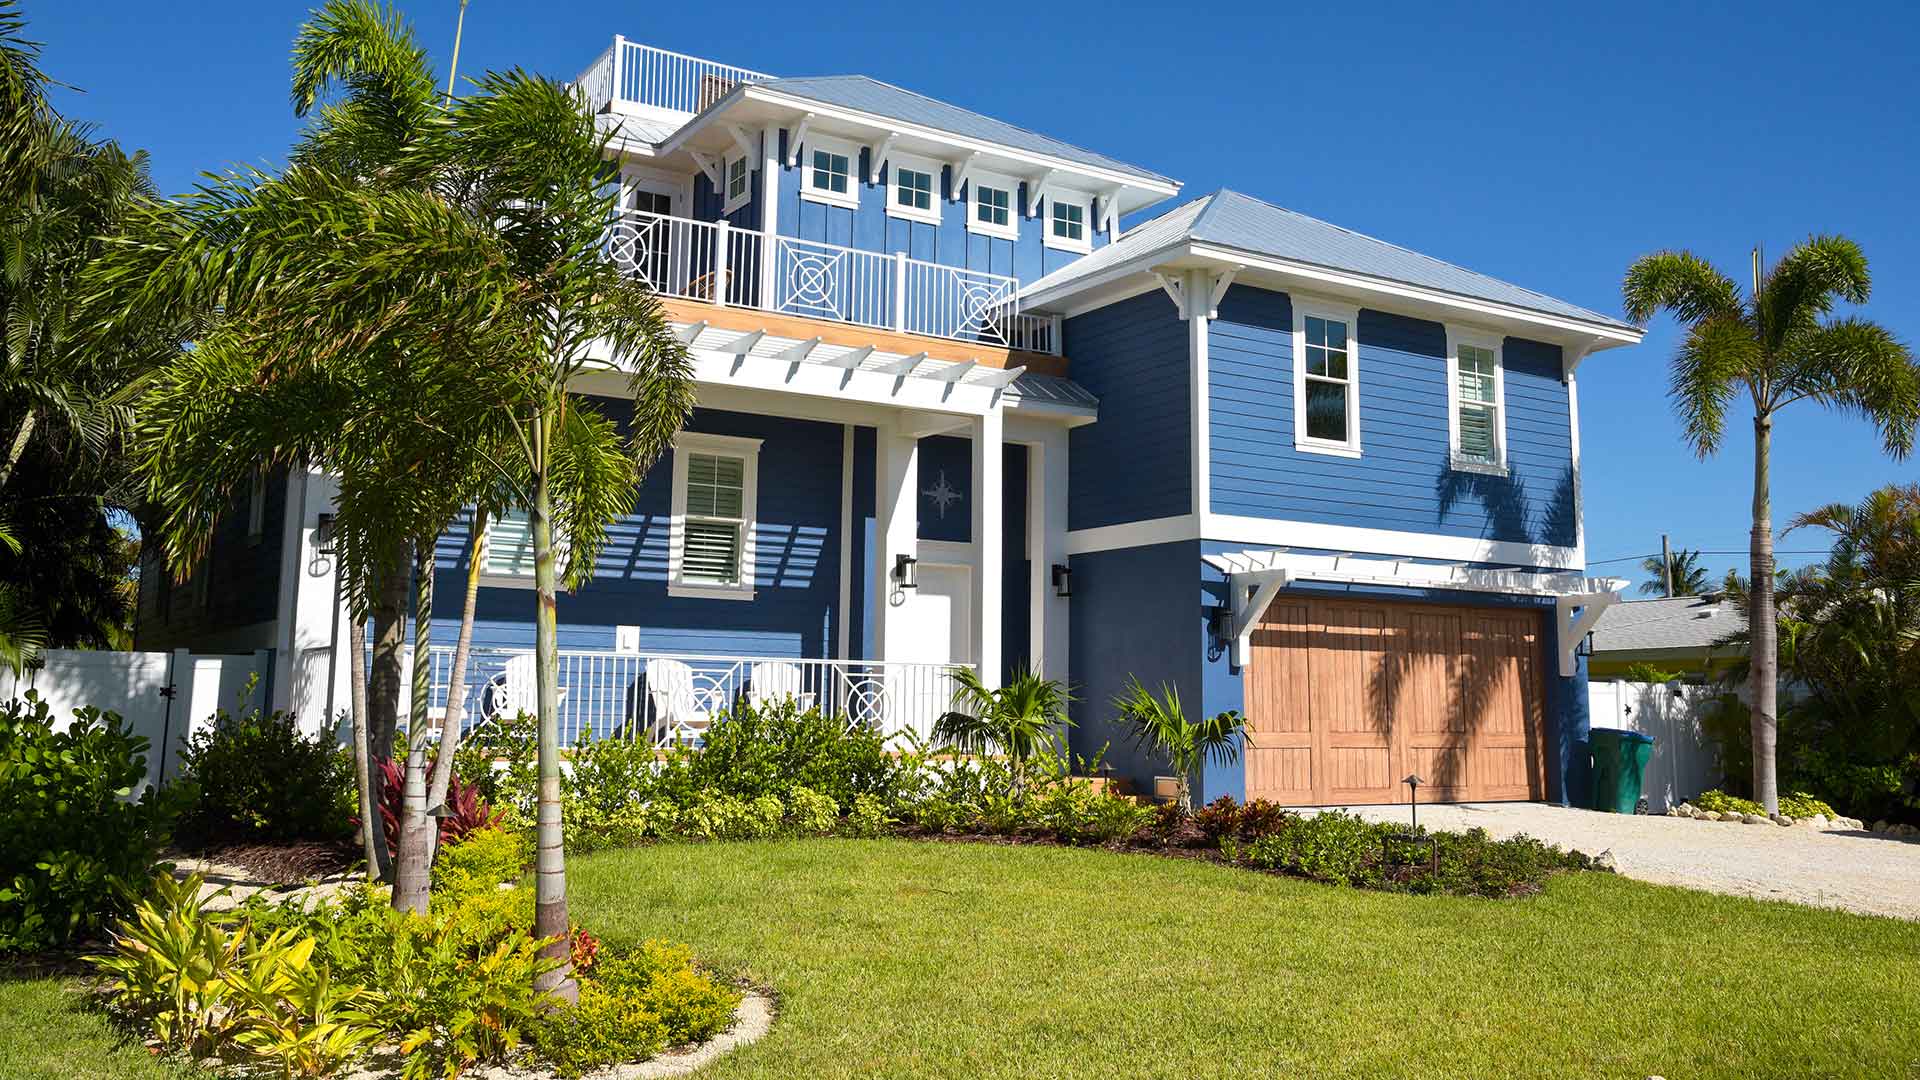 Manalapan, FL beachfront homes benefit from landscaping that uses salt-tolerant plants.